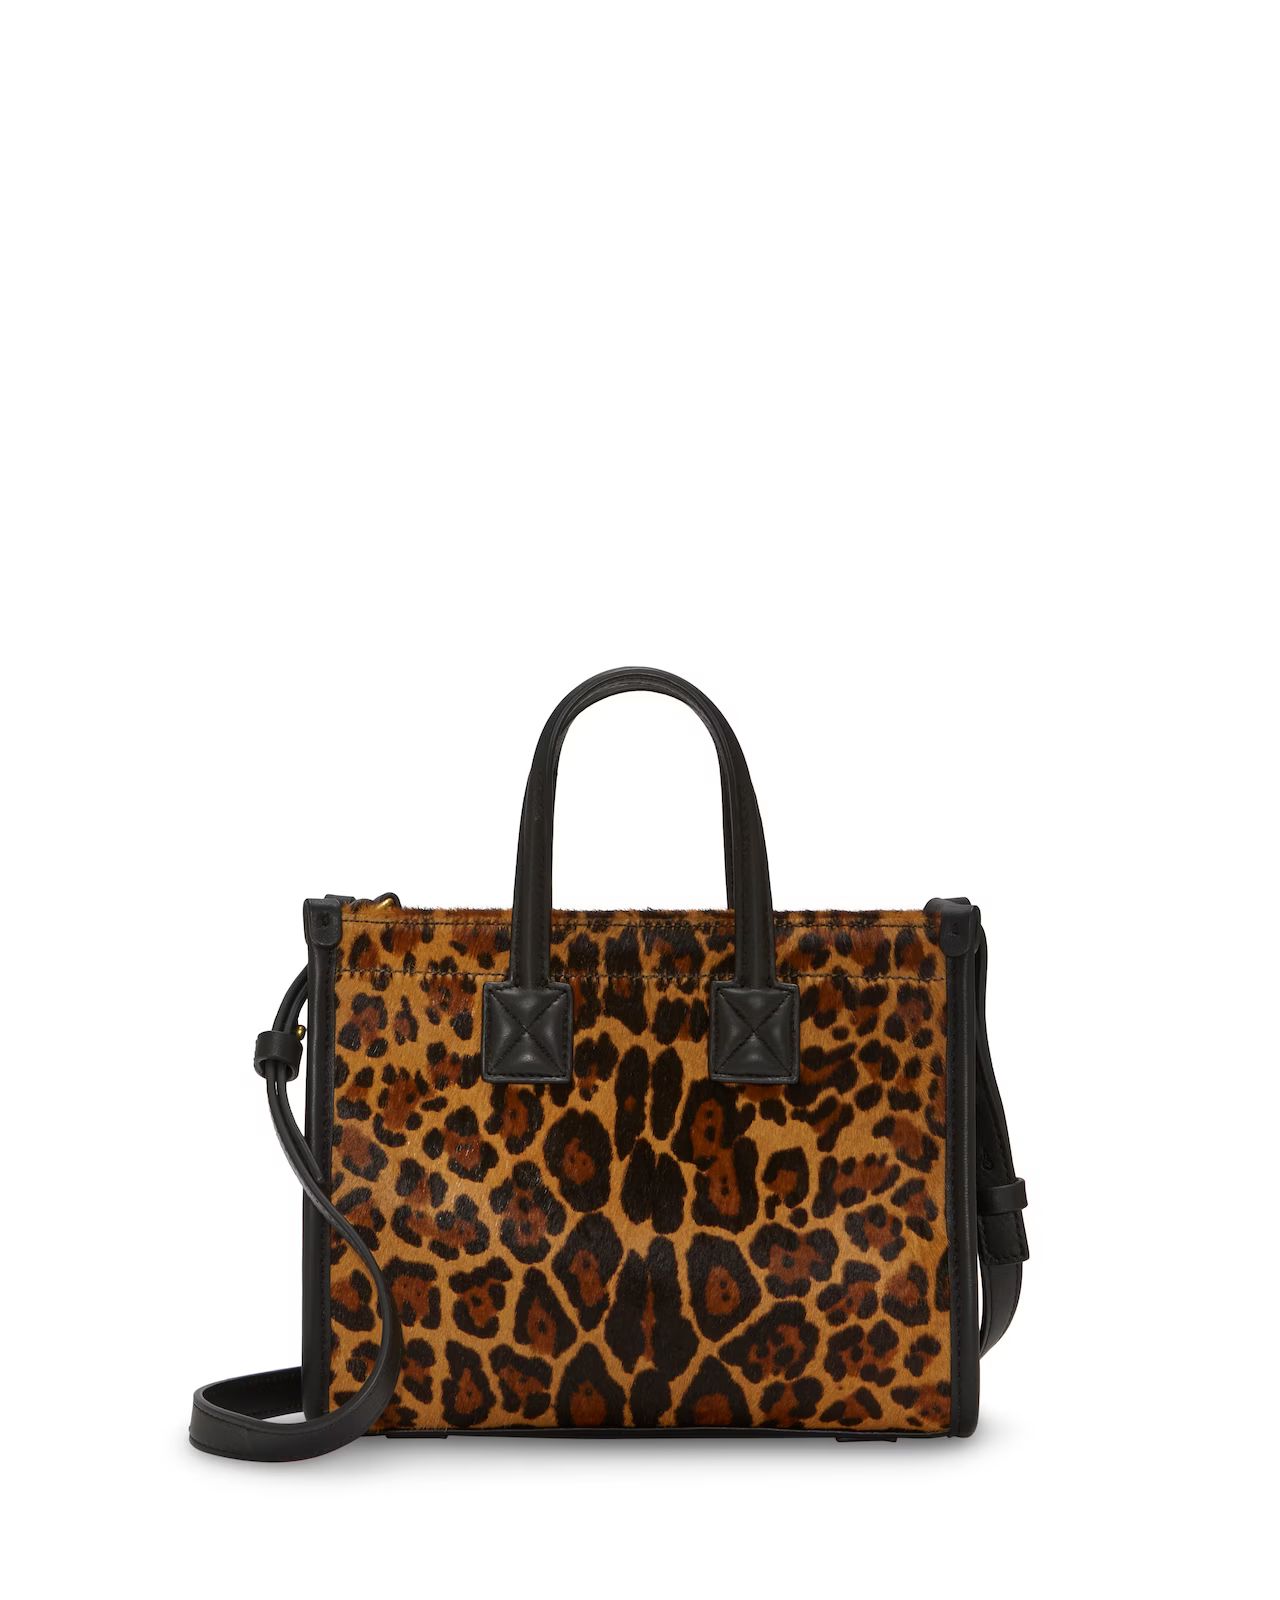 Vince Camuto Saly Small Tote | Vince Camuto